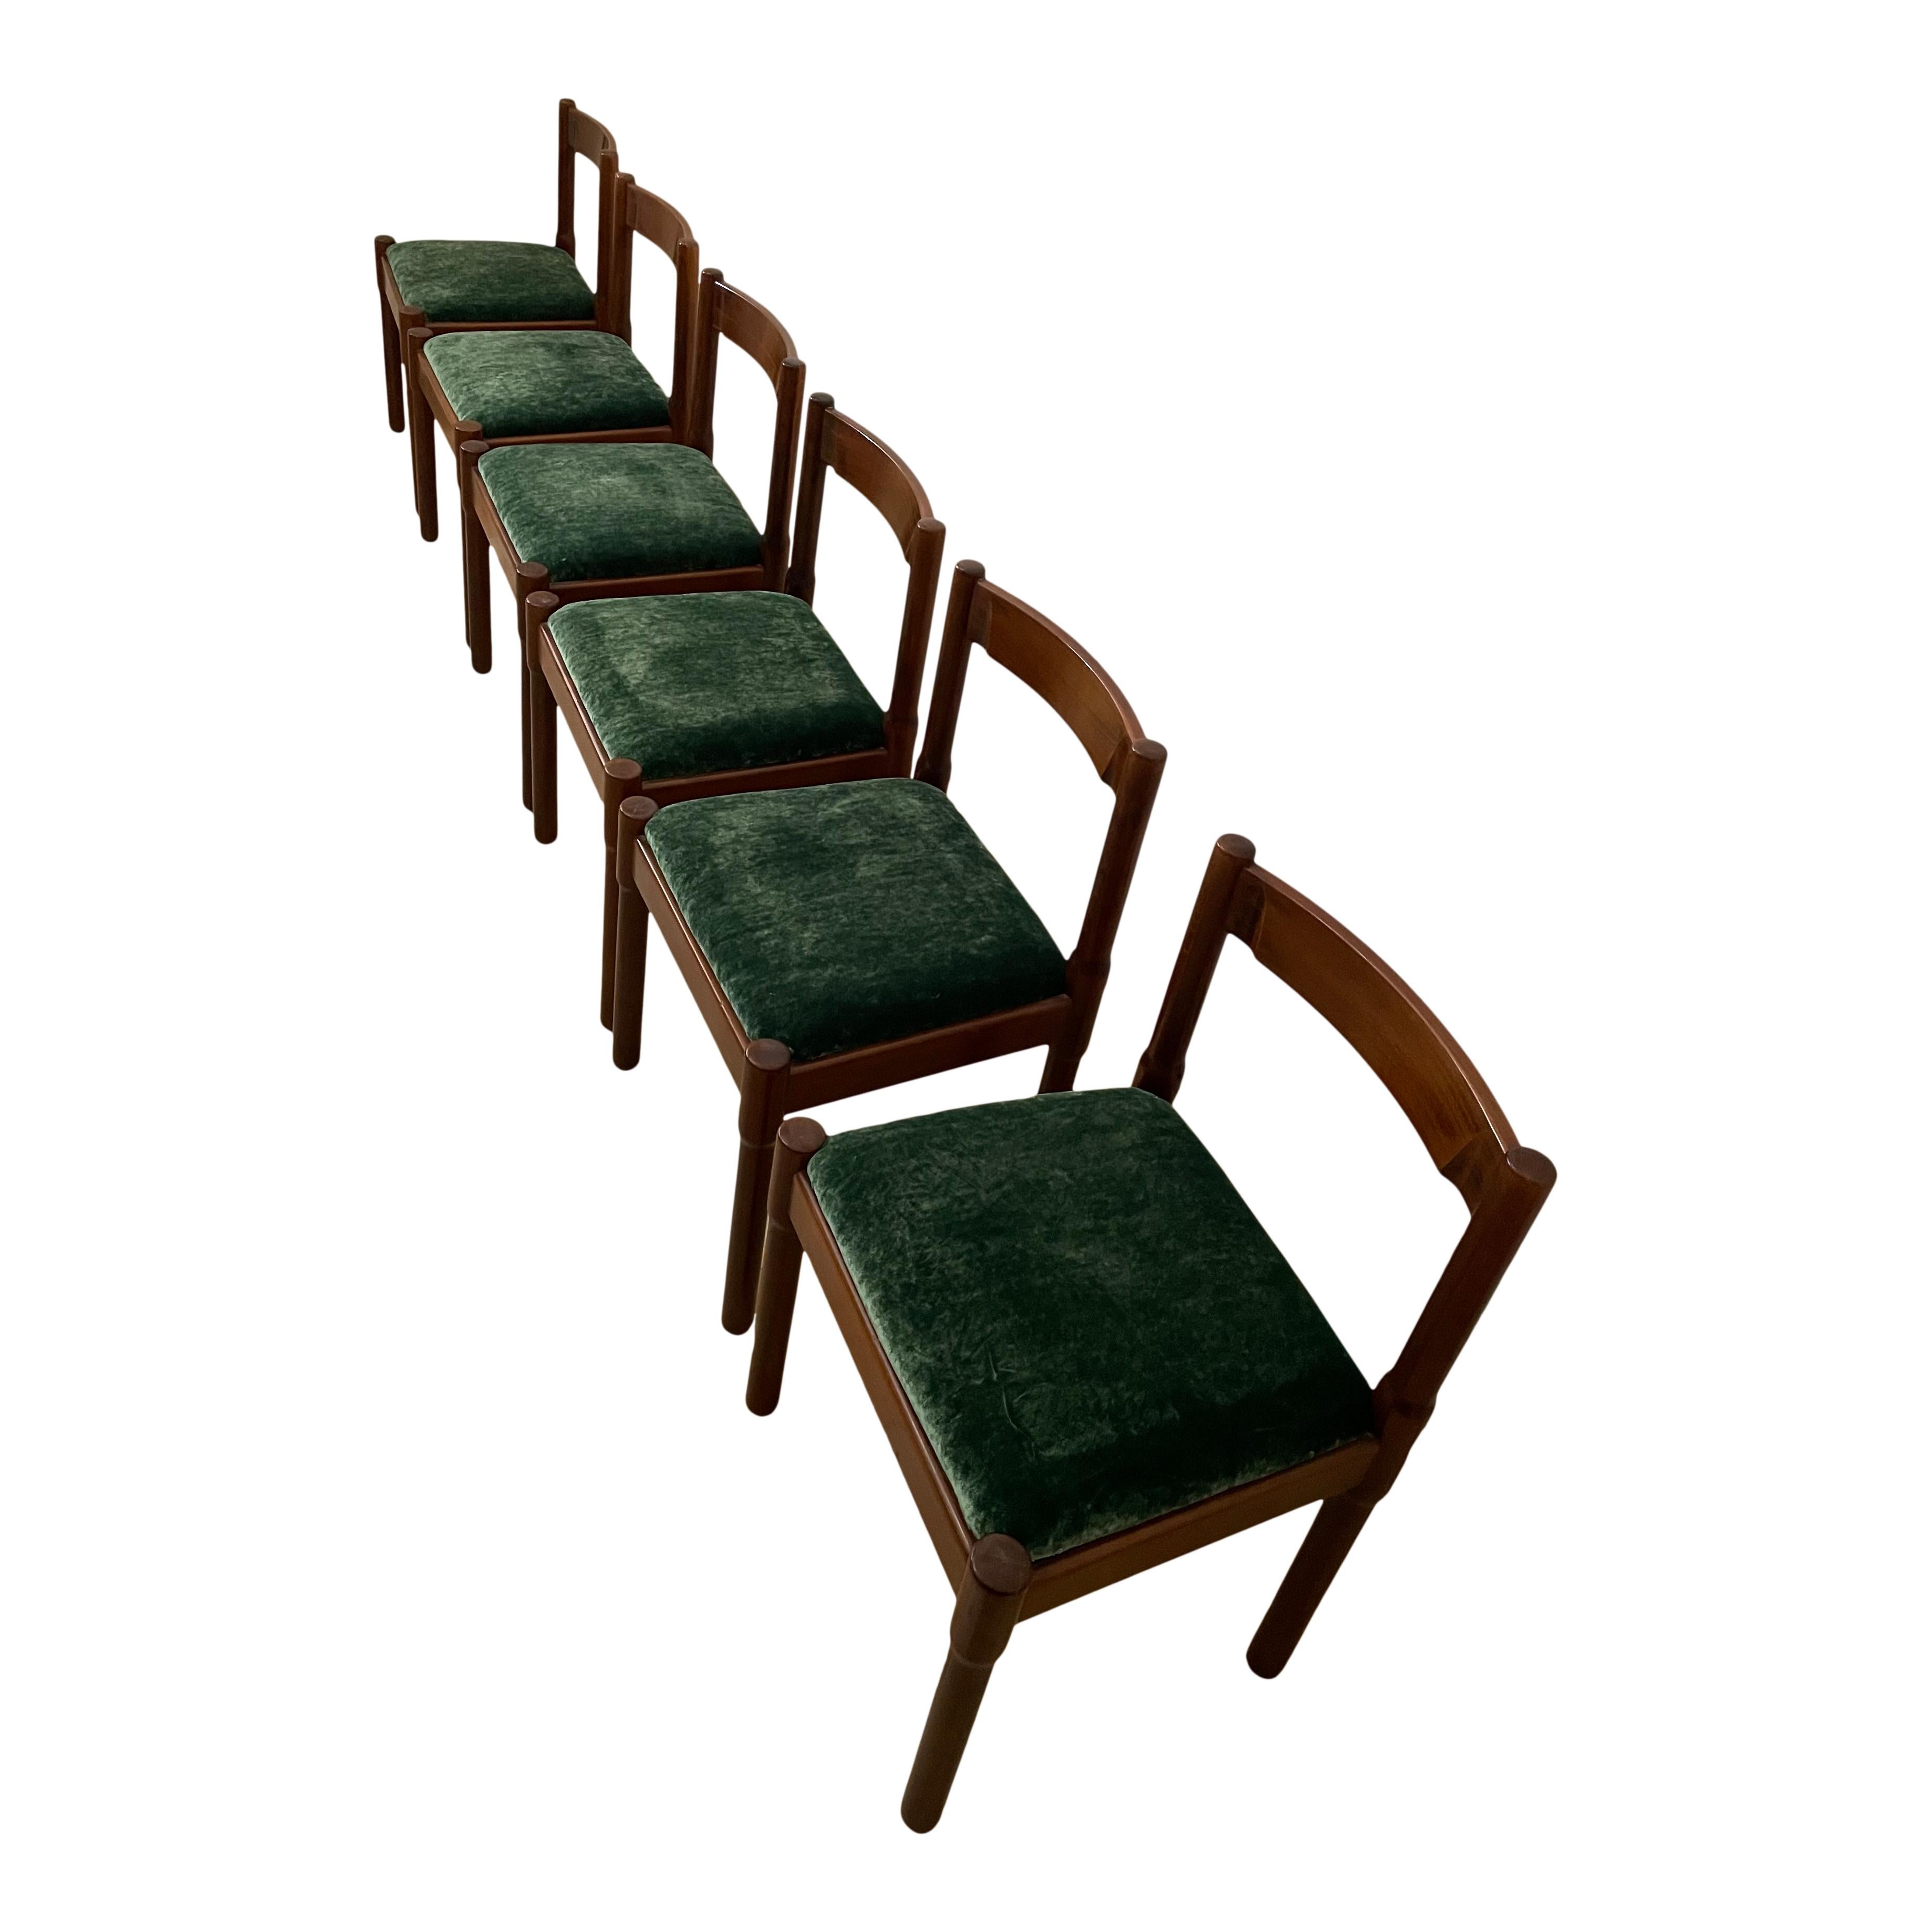  Set of 6 “Carimate” chairs designed by Vico Magistretti and produced by Cassina in 1963.

Initially commissioned for the Carimate Golf club near Milan, they were then produced for the public by Cassina.

Structure in brown beechwood, seating in